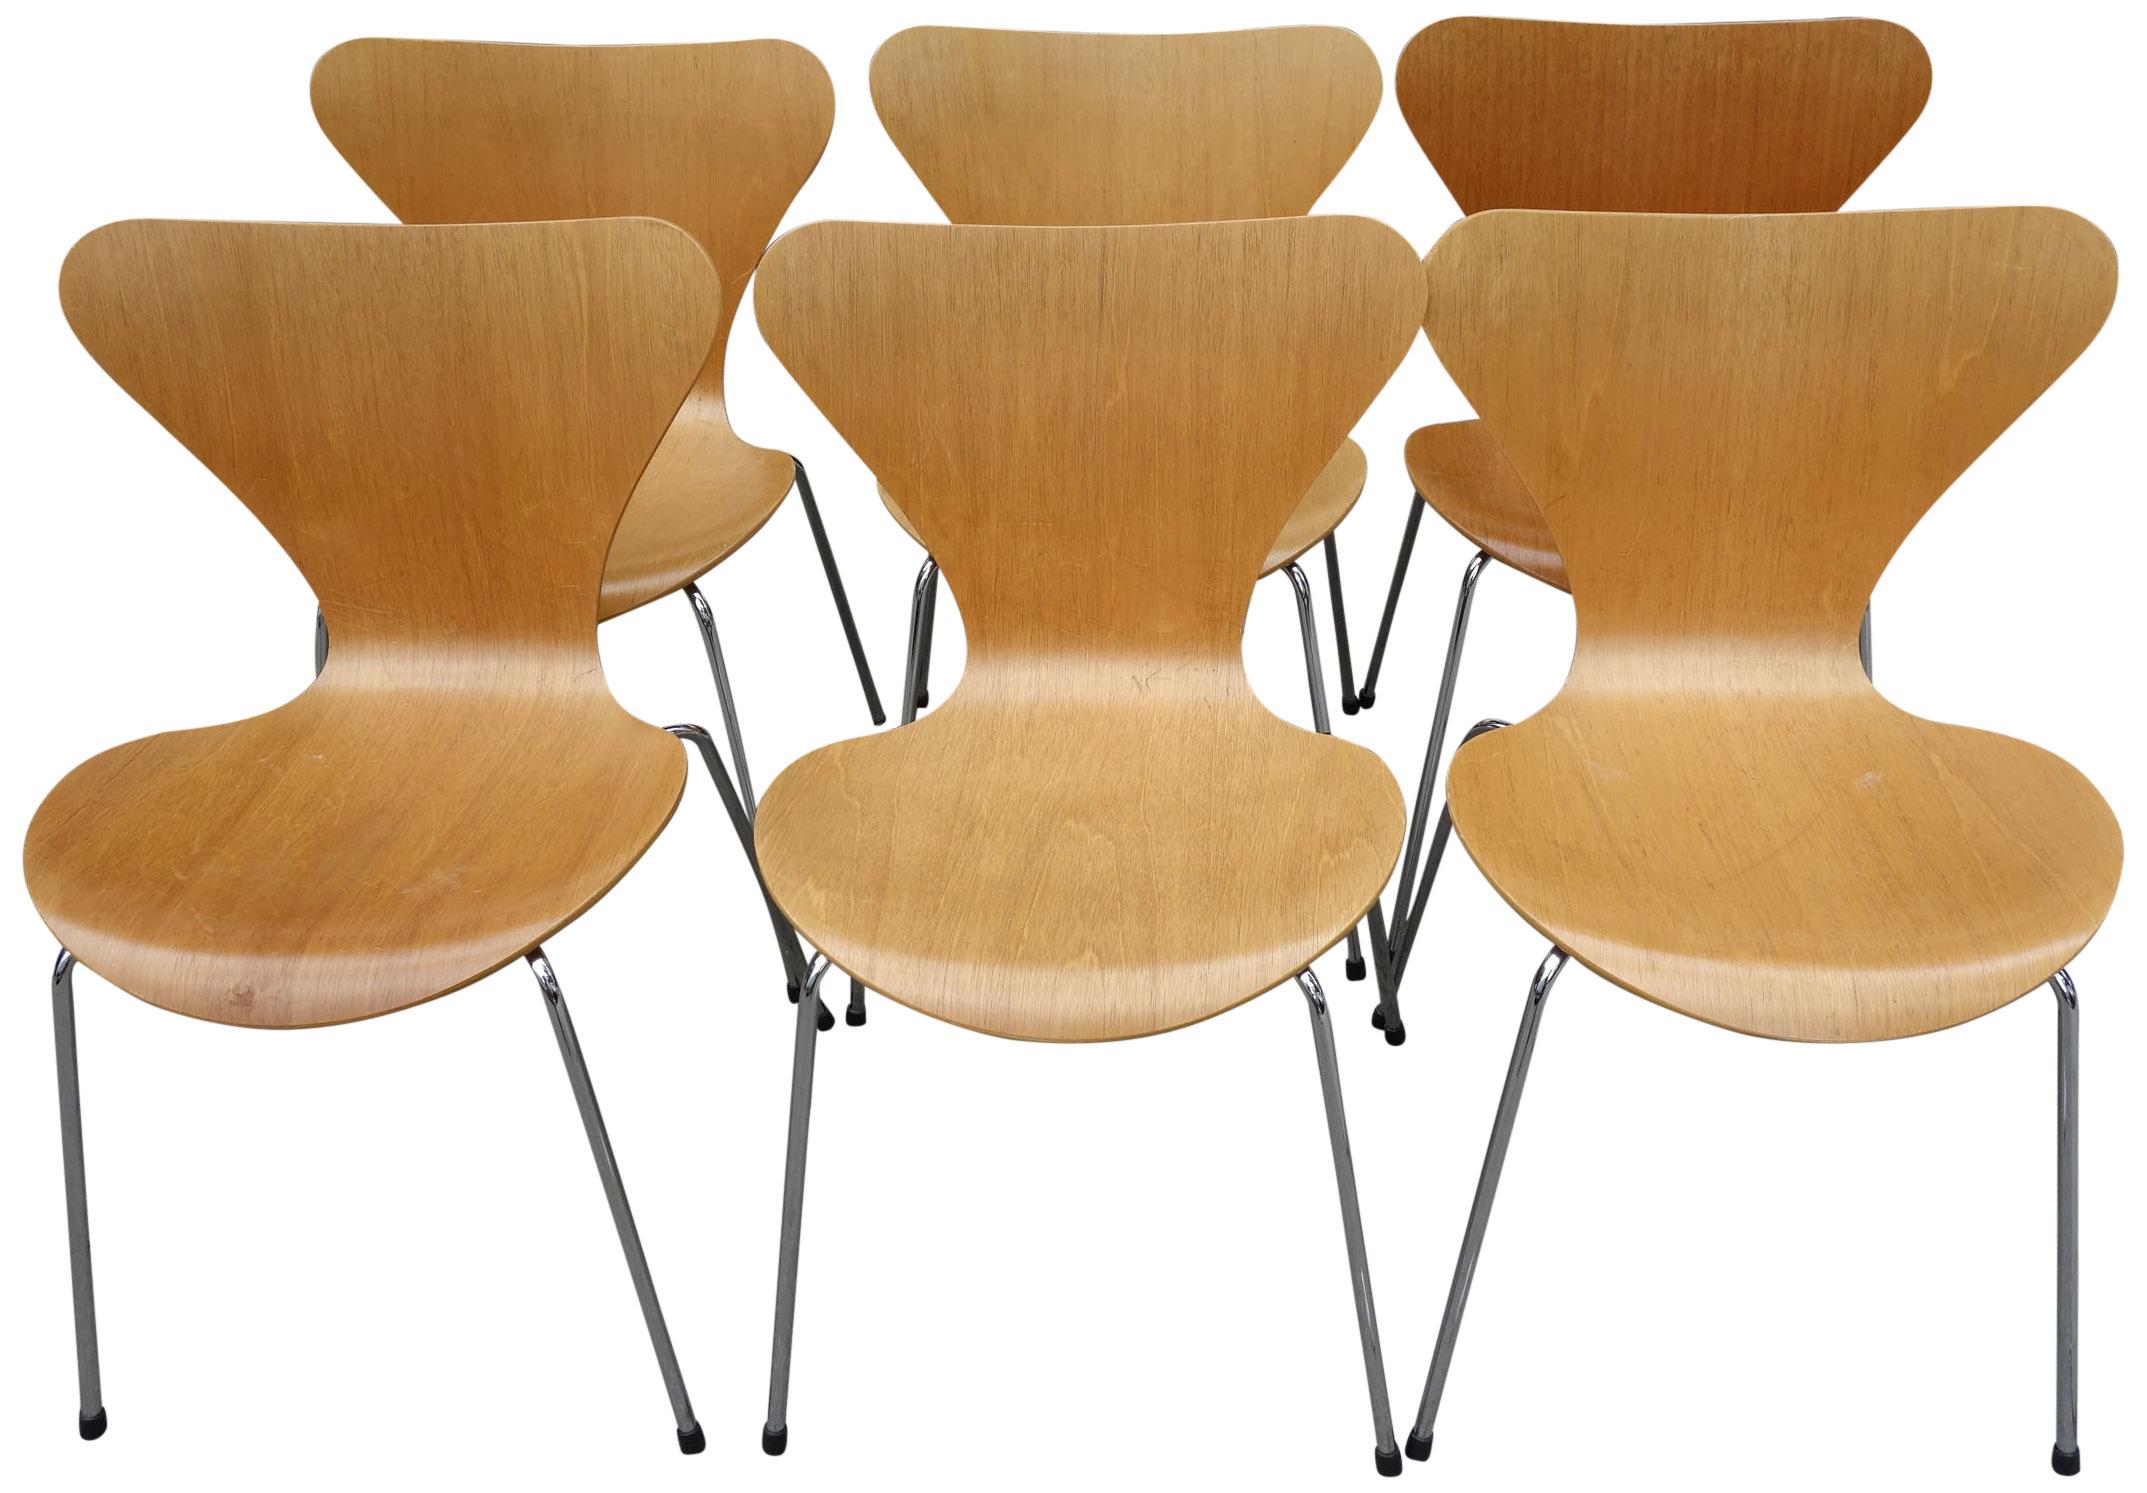 Up to 12 Arne Jacobsen Series 7 Chairs for Fritz Hansen. This iconic design is one of the most successful chairs every produced from this era. Incredibly comfortable as versatile. 

If ordering more then one we will match the patina for you. They